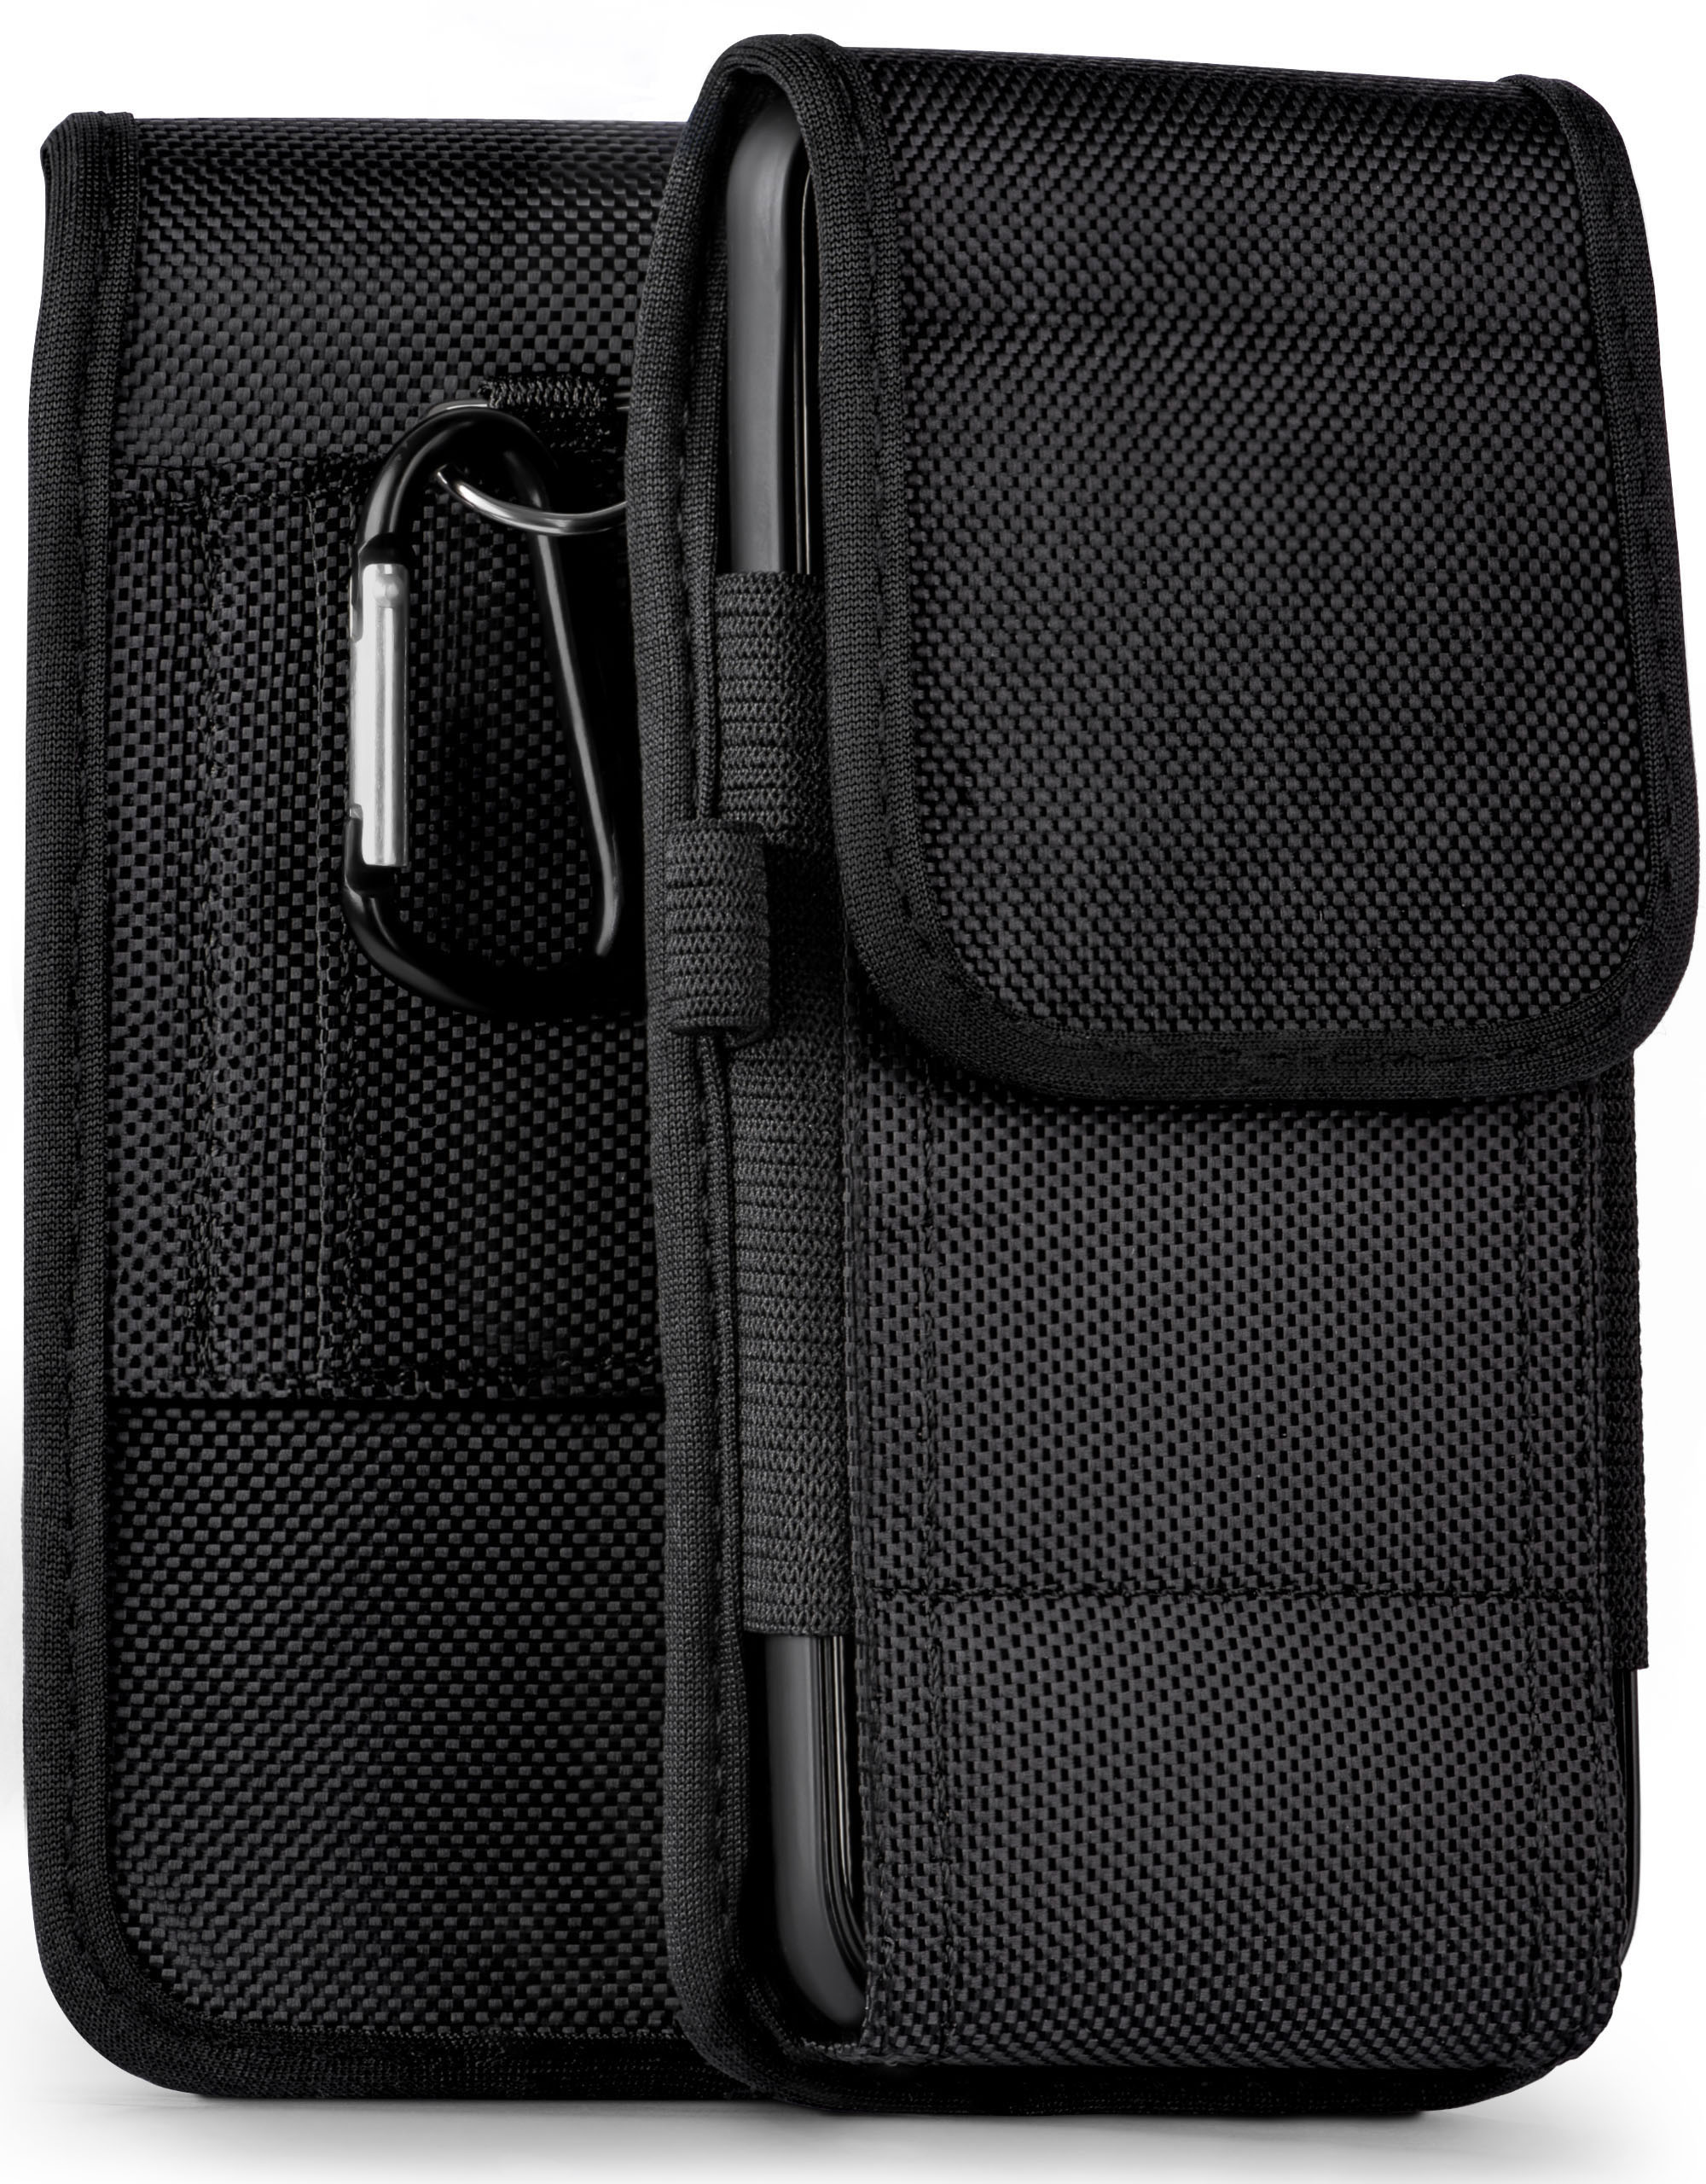 Case, Trail Holster, Sony, Agility MOEX Xperia Z2,